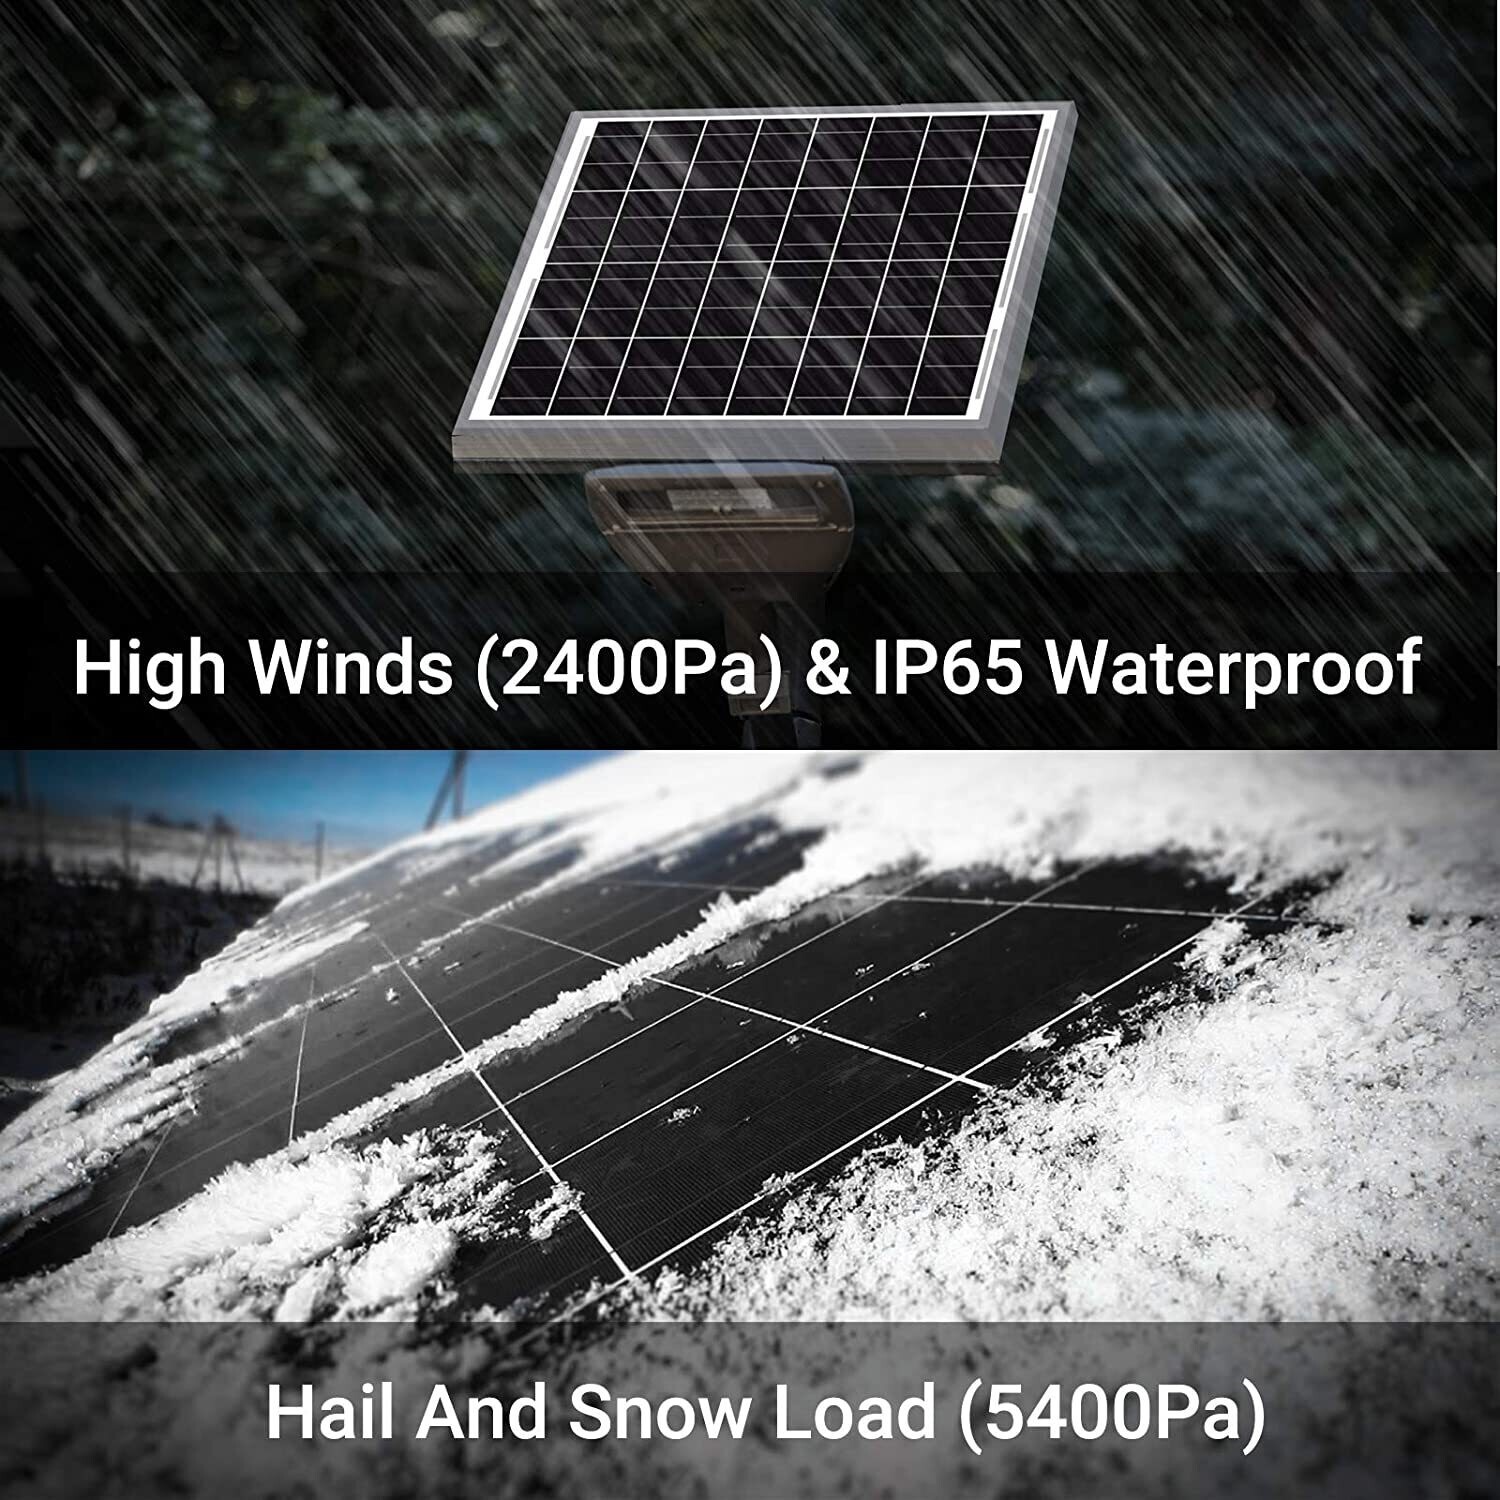 Edobo solar 140w solar panels factory price cost of solar panel installation for your home